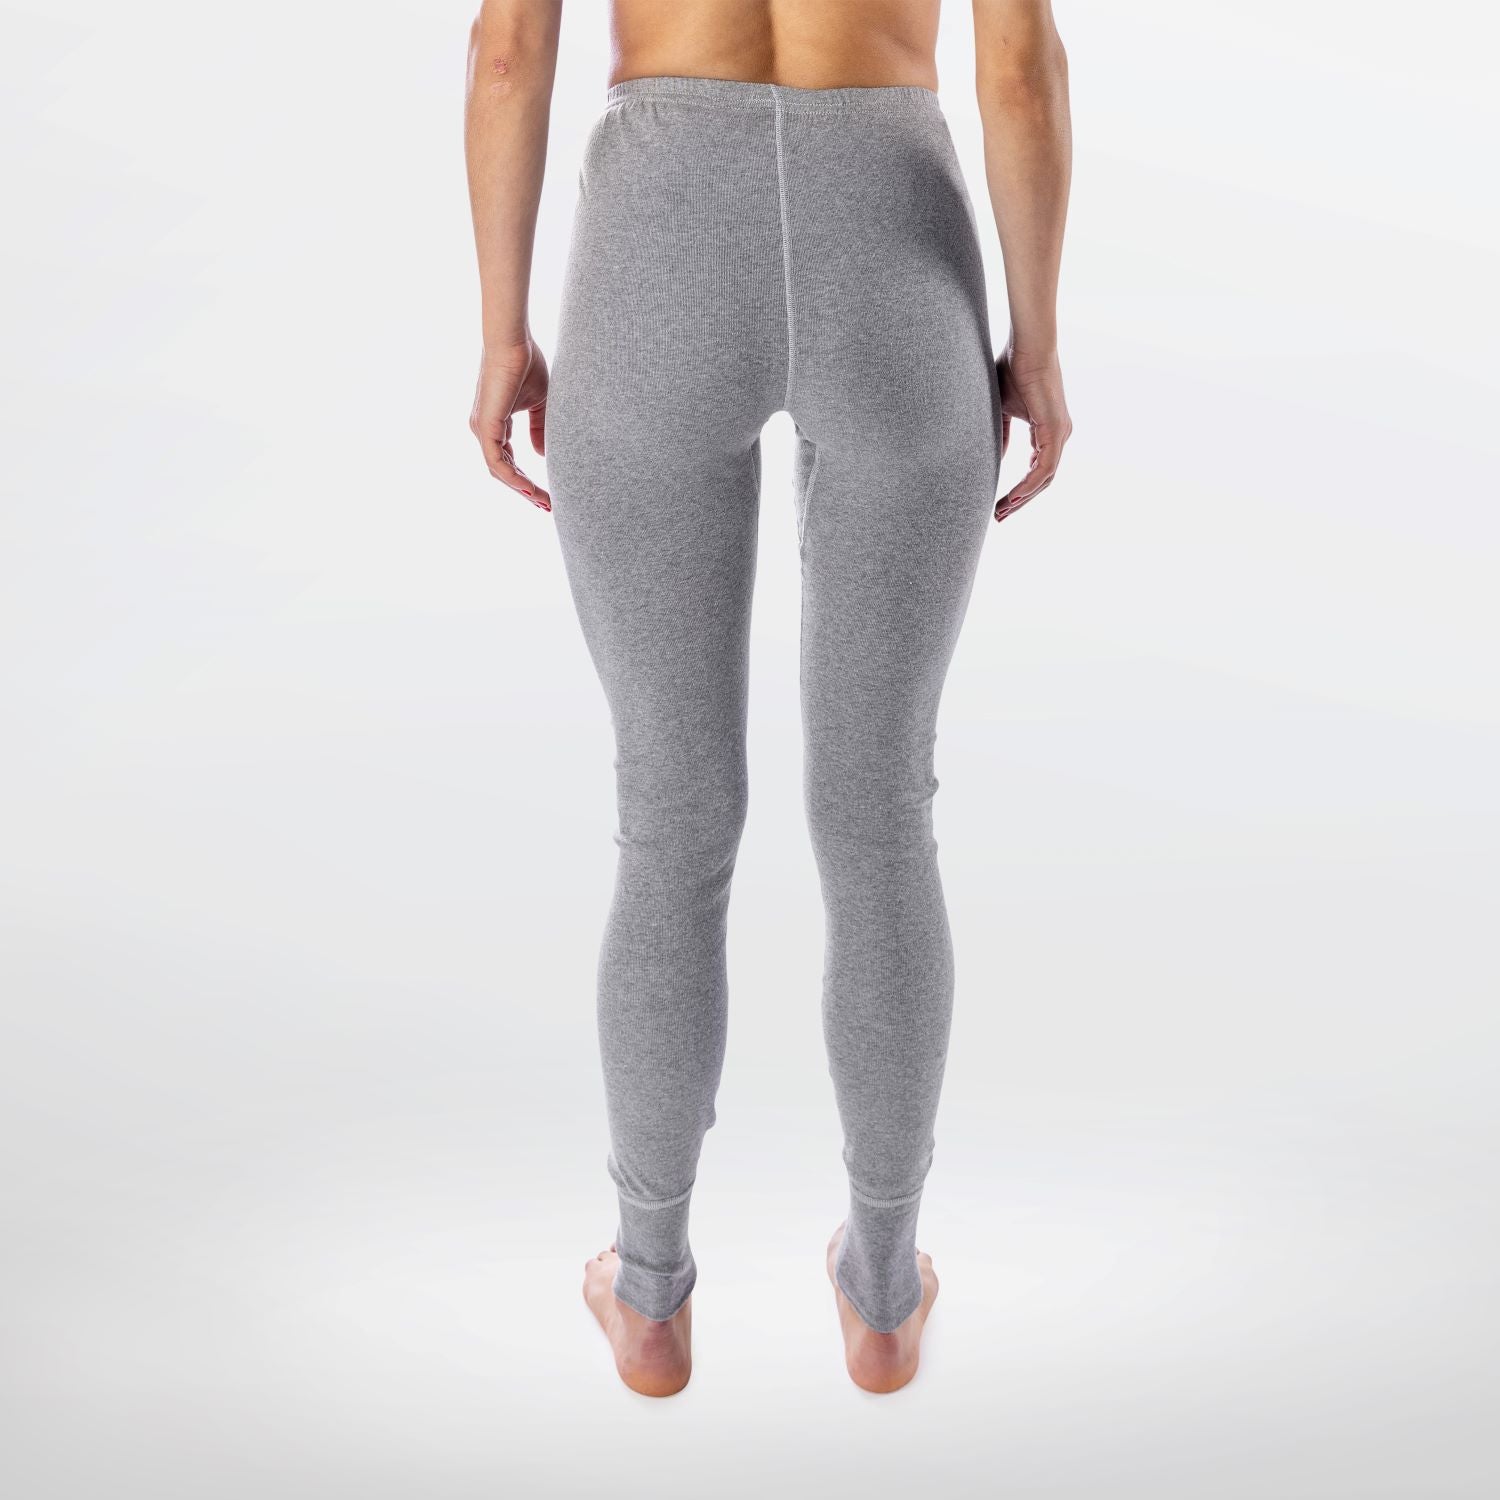 Women's Leggings Chill Chasers Collection (Cotton Rib)